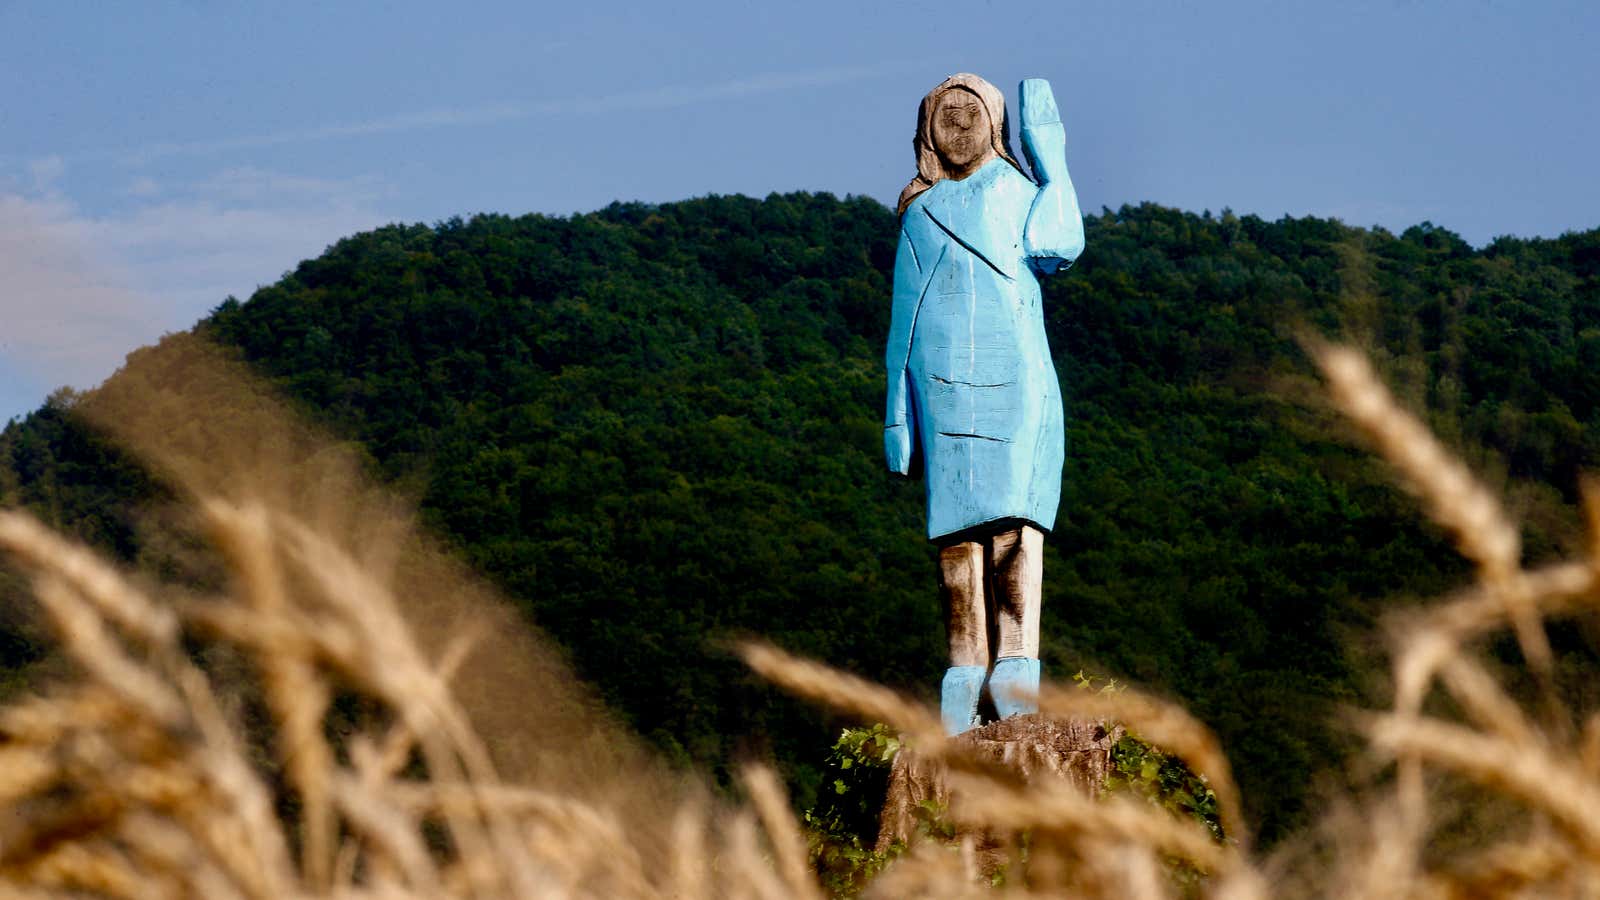 A life-size wooden sculpture of Melania Trump in her hometown in Slovenia.